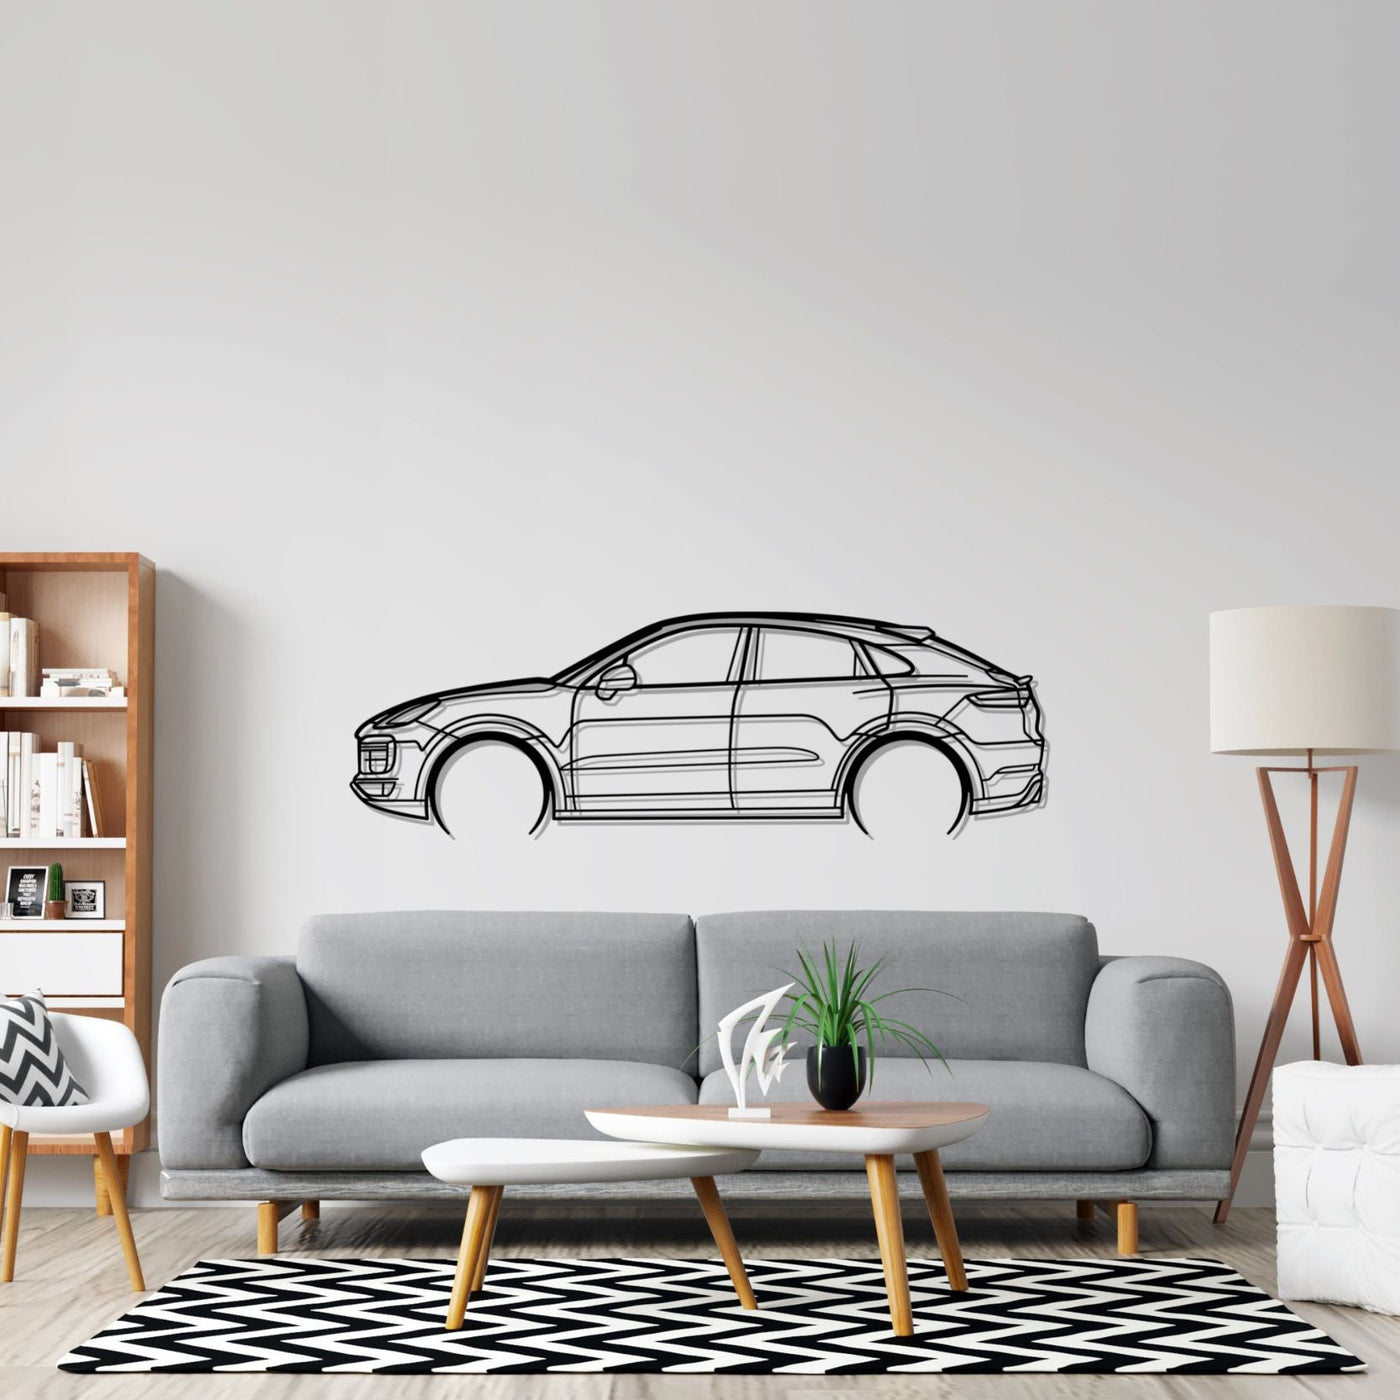 Cayenne Turbo Detailed Silhouette Metal Wall Art